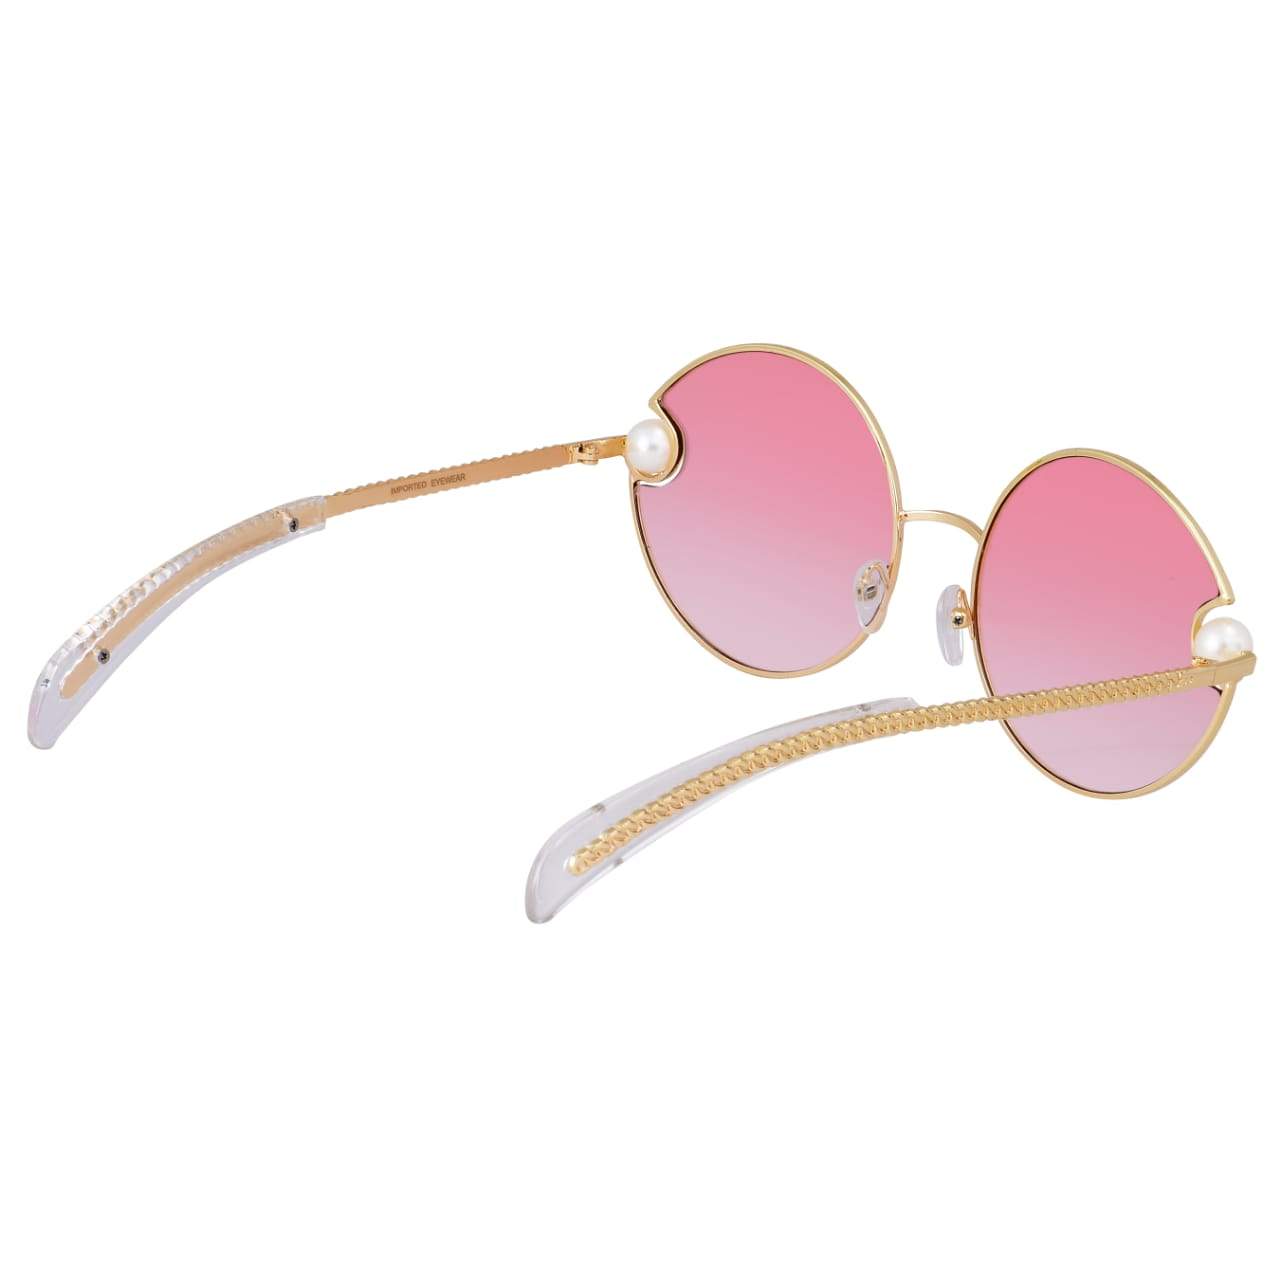 Trendy Round Oversized Pink Candy Sunglasses For Women-Unique and Classy